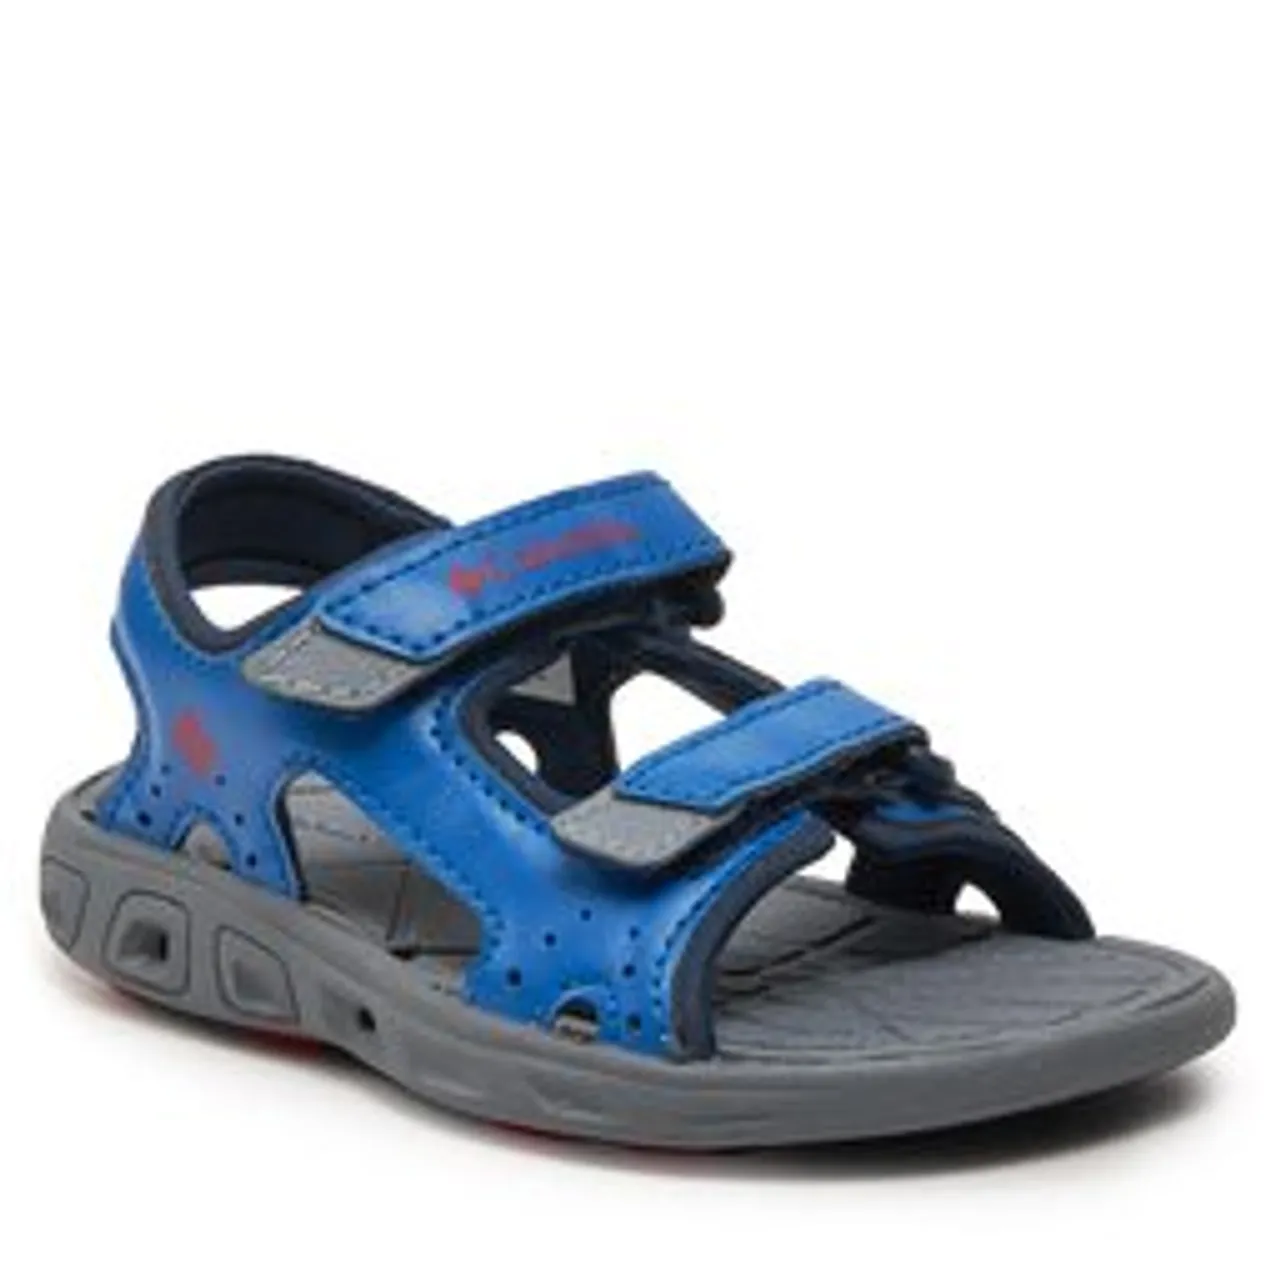 Sandalen Columbia Childrens Techsun Vent BC4566 Stormy Blue/Mountain Red 426